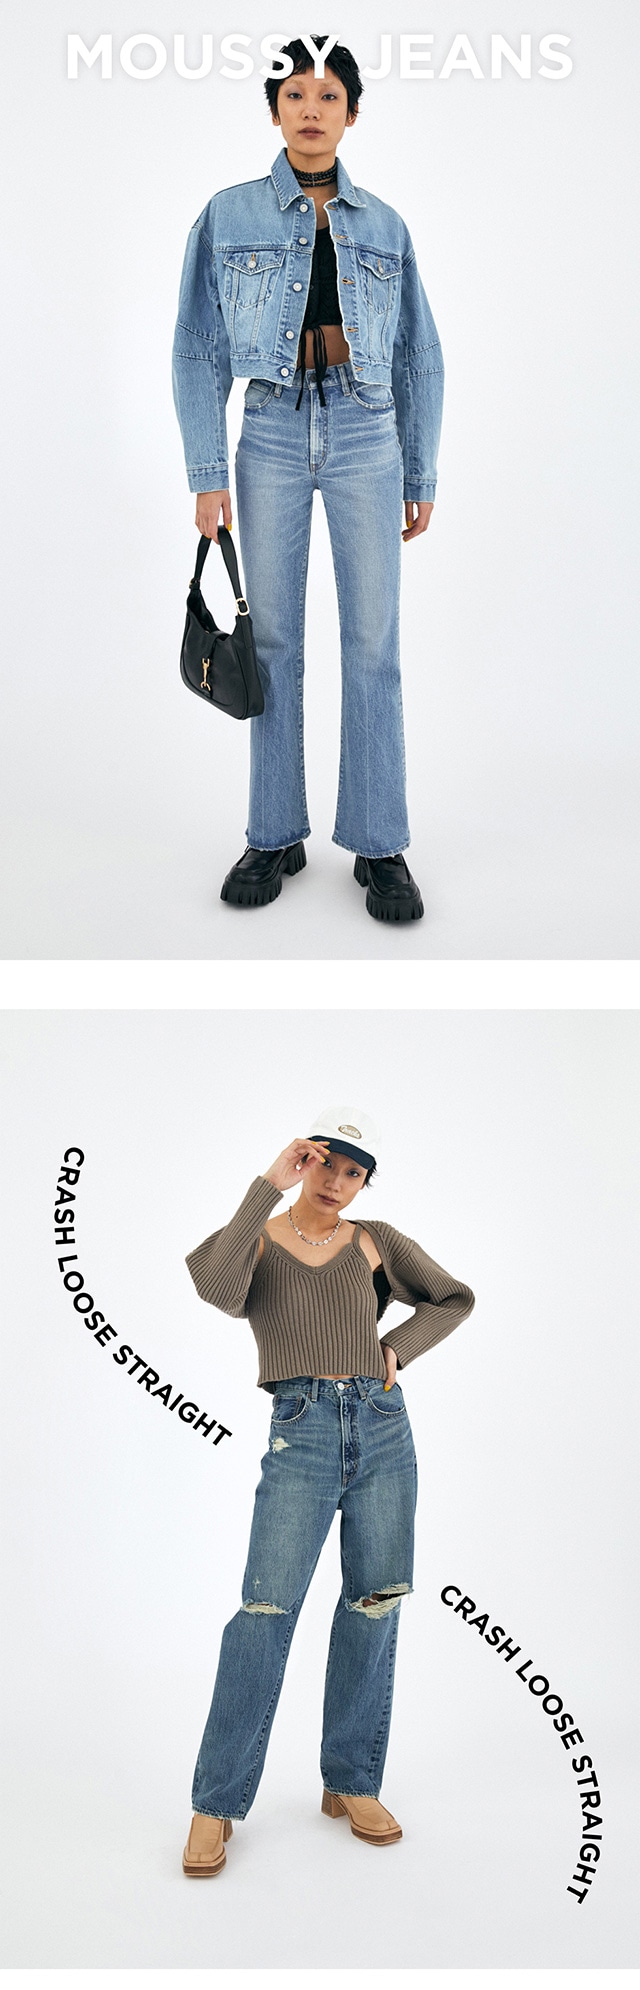 MOUSSY JEANS in every way｜バロックジャパンリミテッド 公式通販